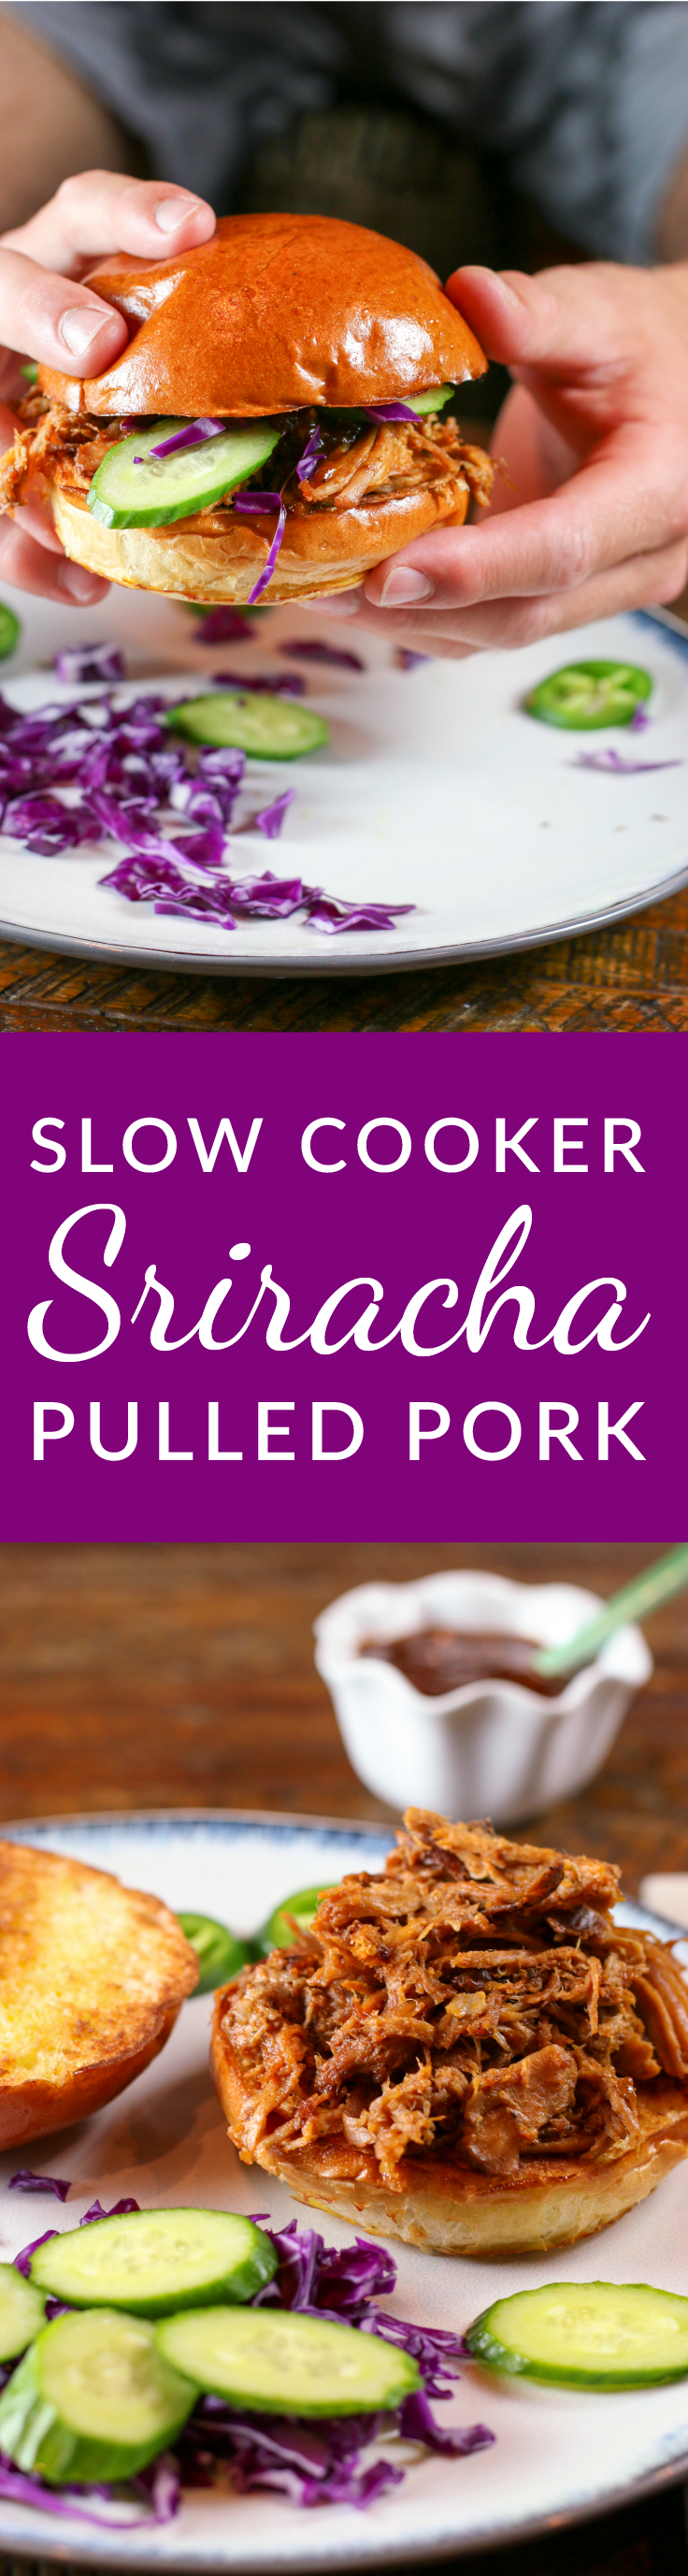 This recipe is a slow-cooker version of Sweet and Sriracha Spicy Oven Roast Pulled Pork by White on Rice Couple. Use this pulled pork to make delicious sandwiches or spicy tacos. 